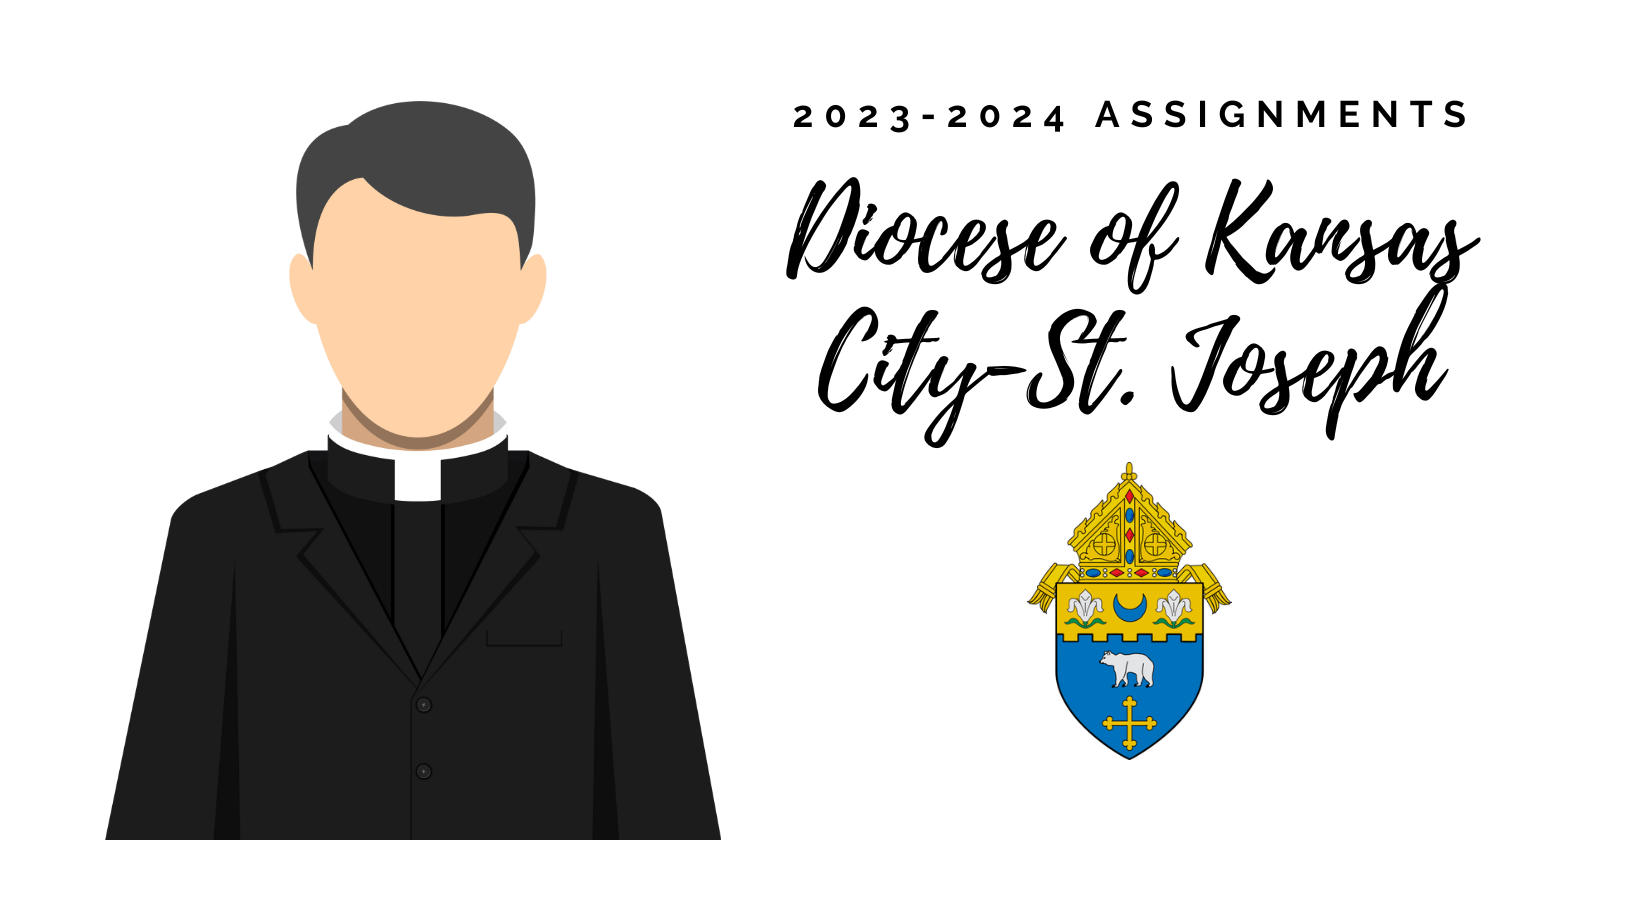 new priest assignments 2023 archdiocese of denver